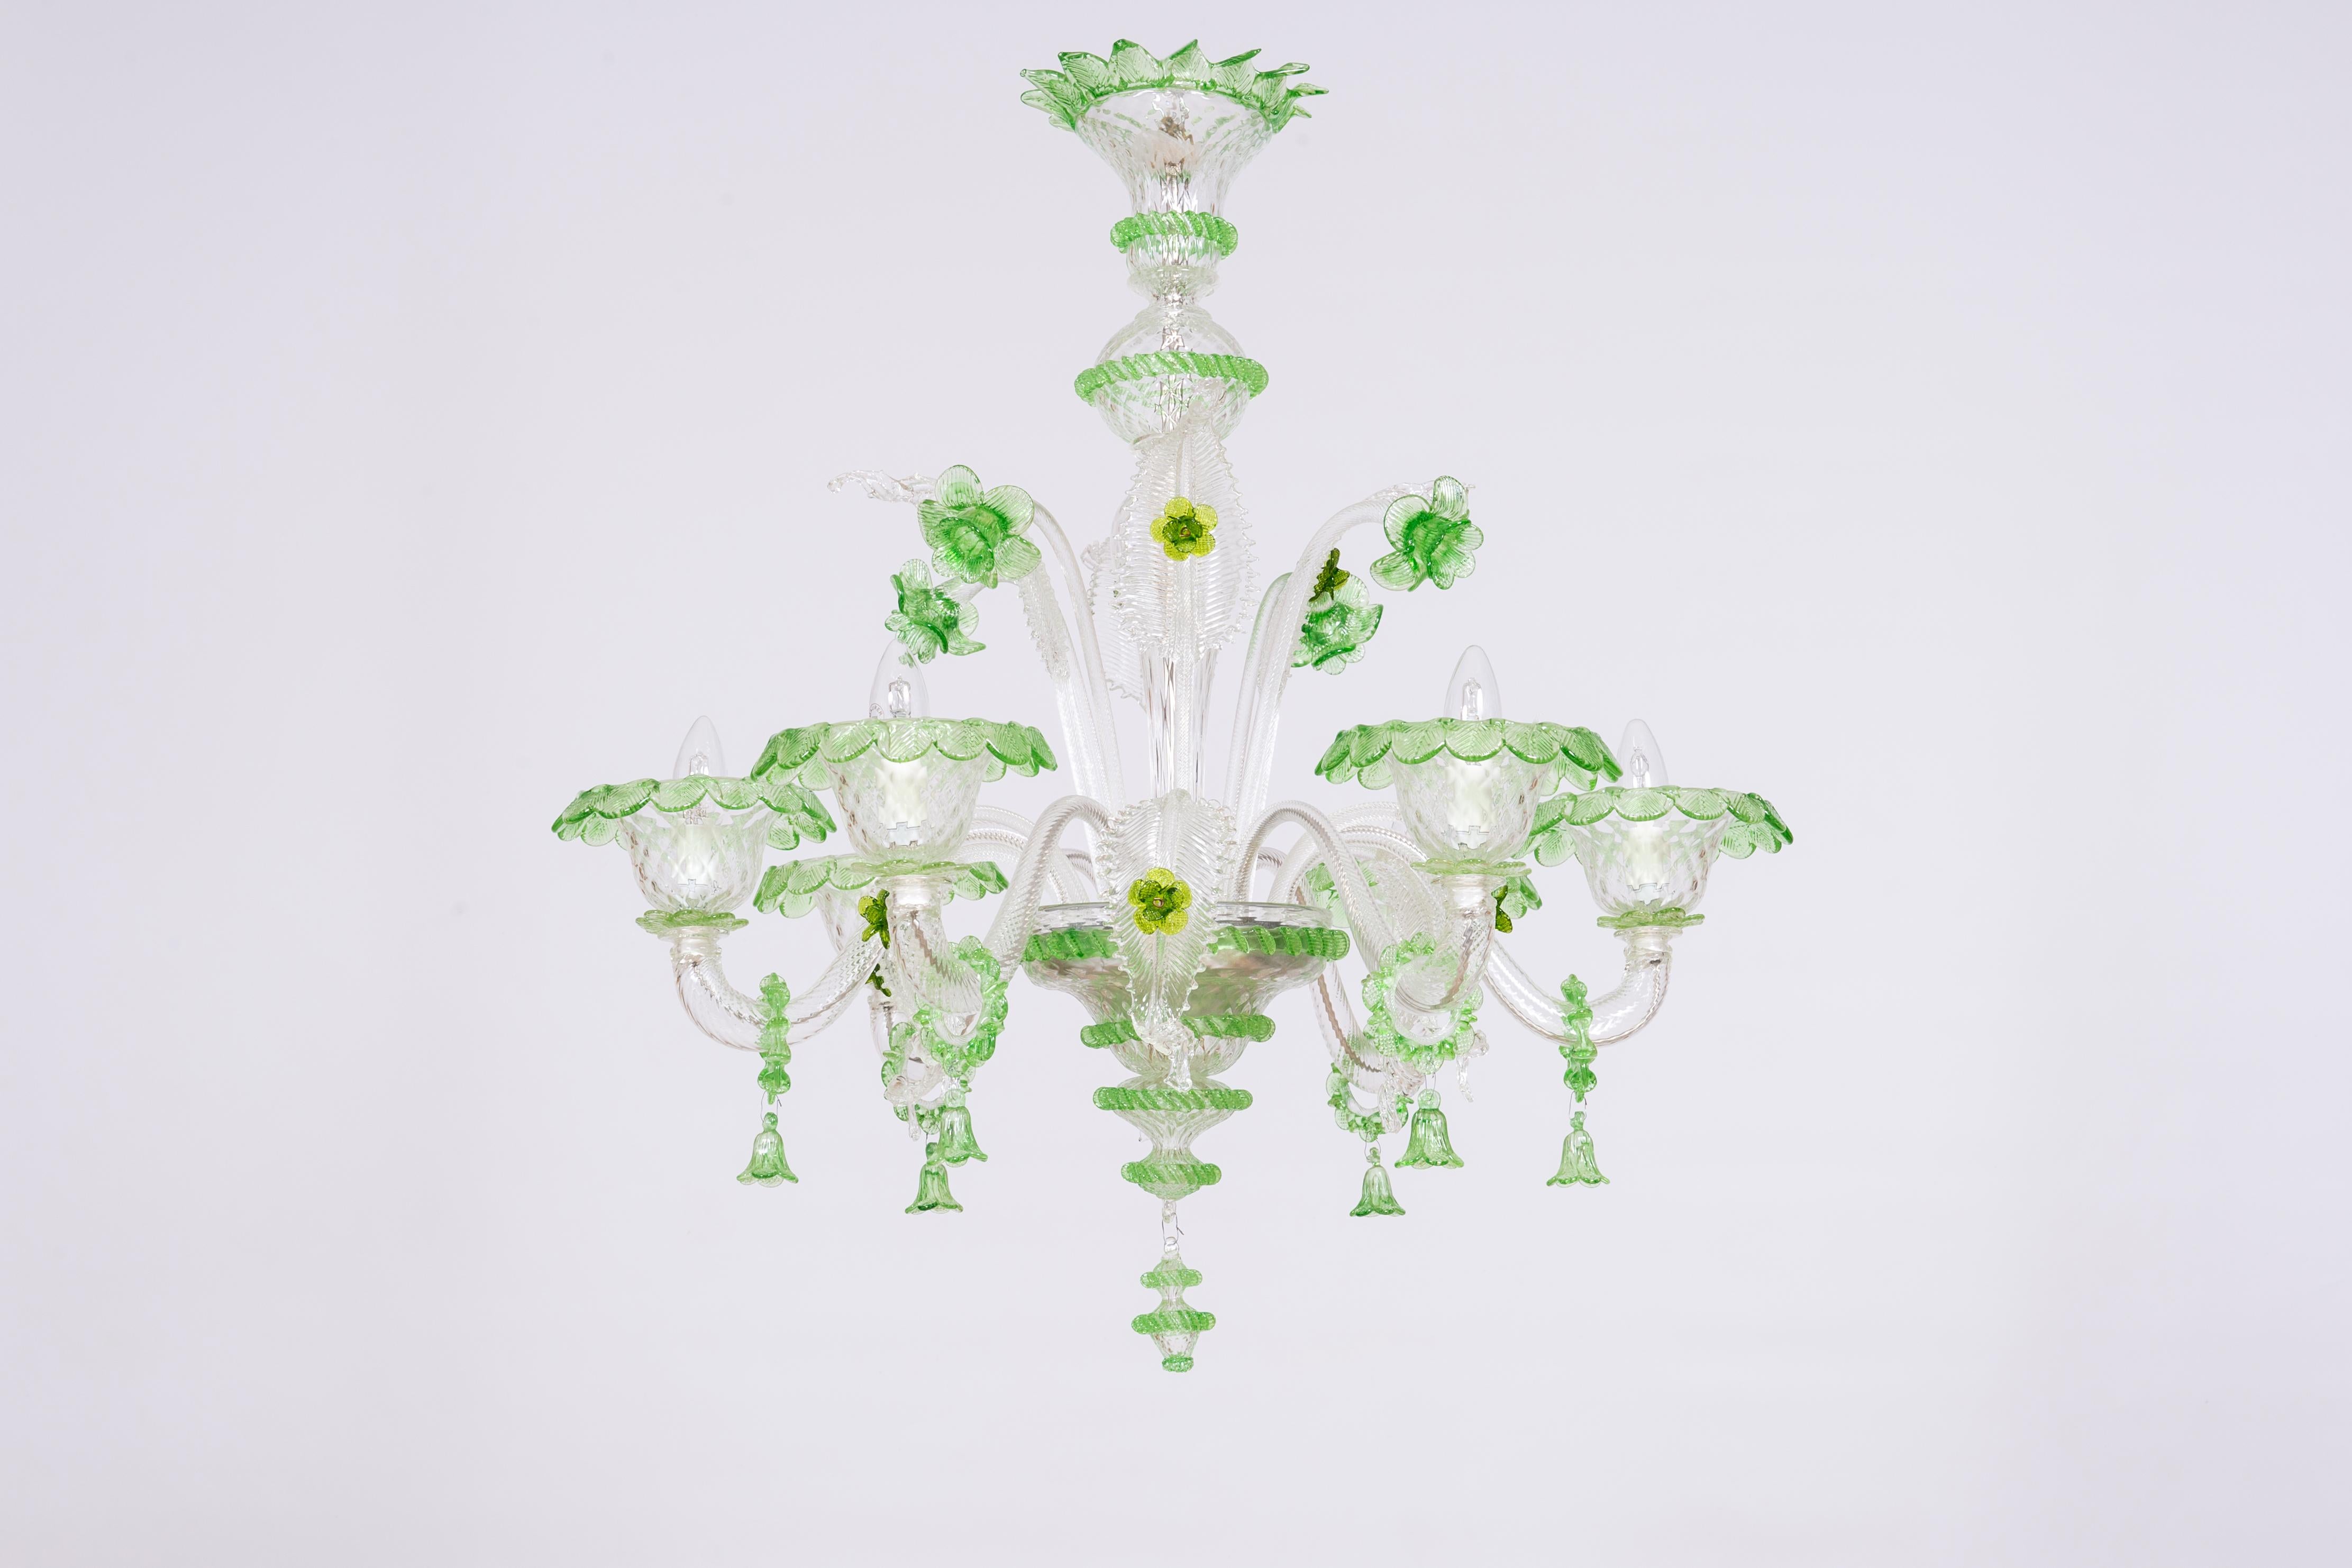 Bellflowers Rezzonico Chandelier in Clear and Green Murano Glass Venice Italy, 21st century.

Entirely handmade of blown Murano glass, this chandelier is an original work of art by the Italian artist and designer Giovanni Dalla Fina. Produced in